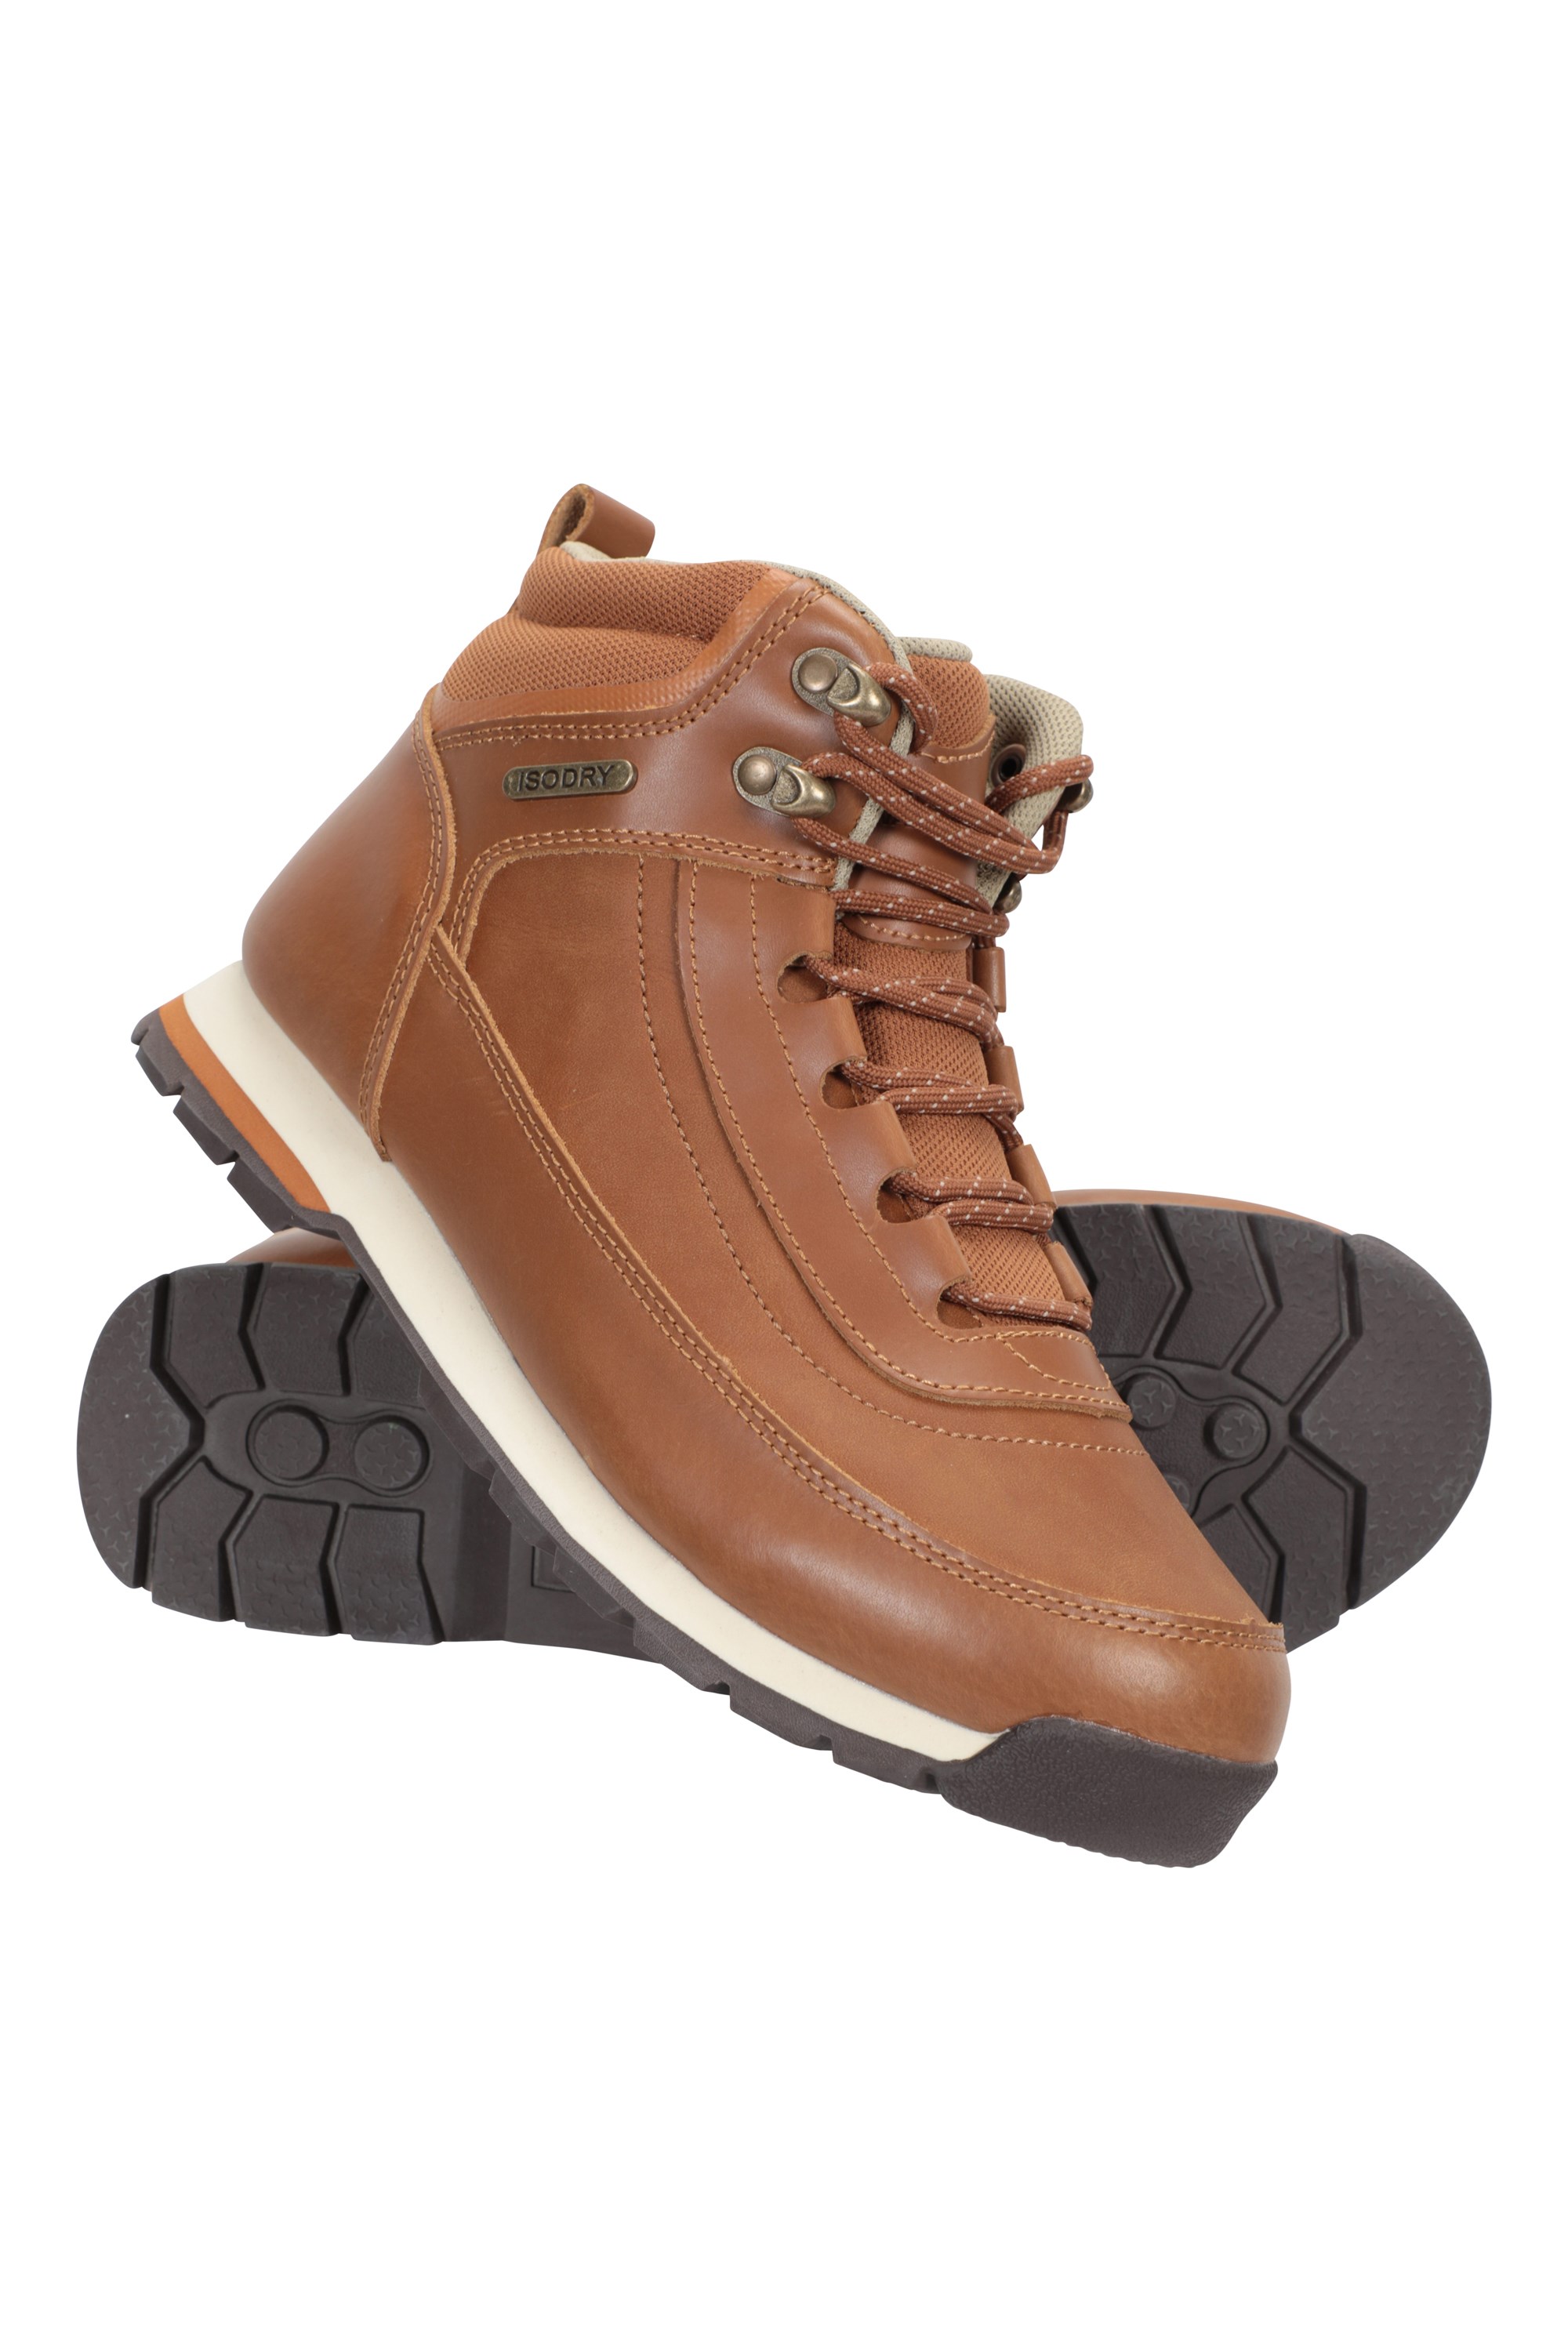 ladies leather walking boots